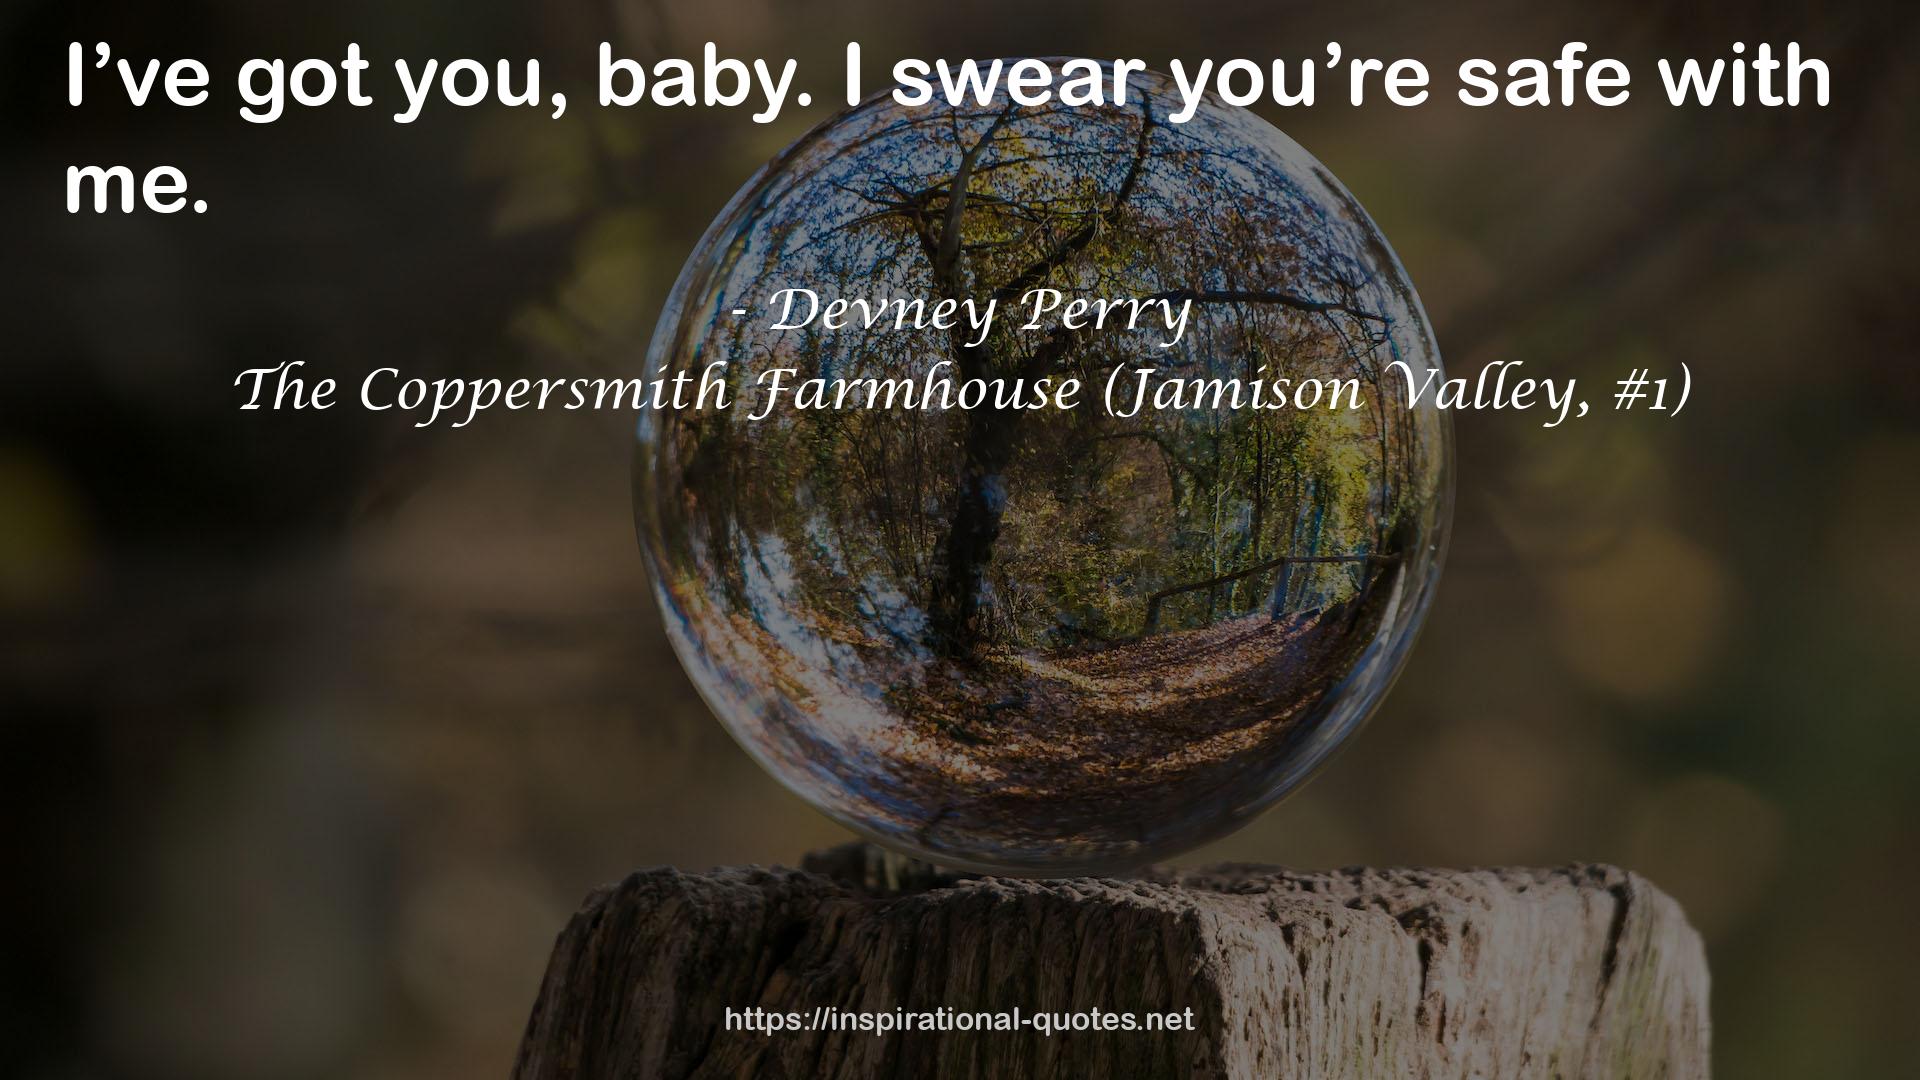 The Coppersmith Farmhouse (Jamison Valley, #1) QUOTES